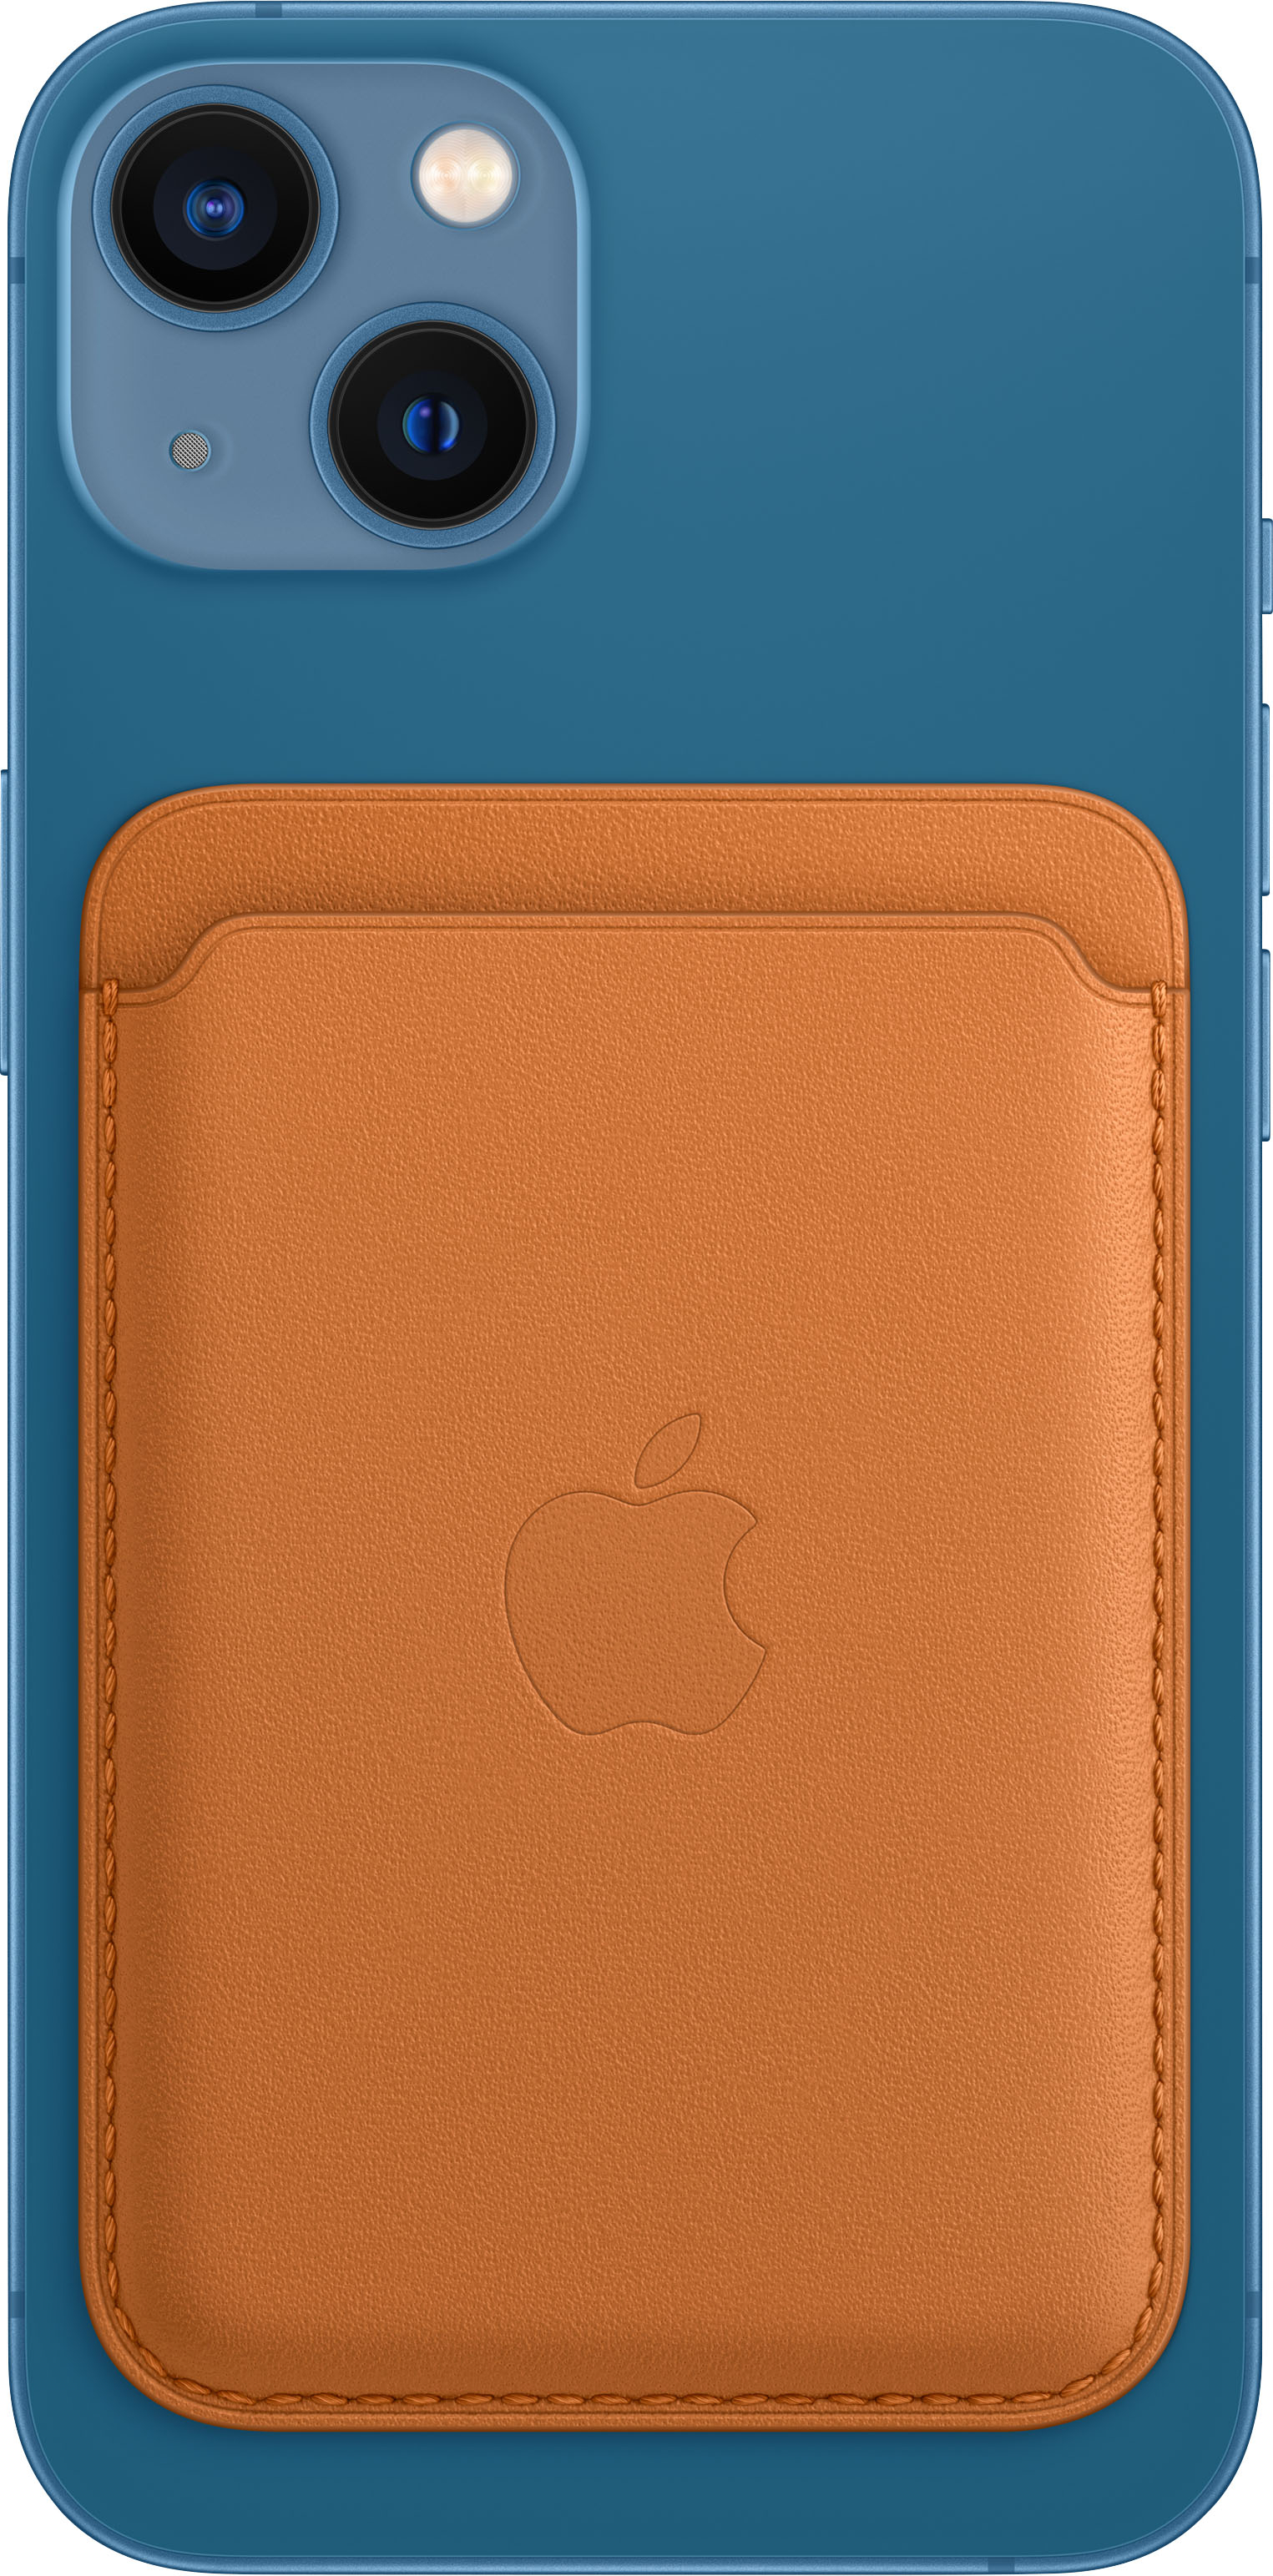 Apple's leather MagSafe wallet is hard to lose track of [Review